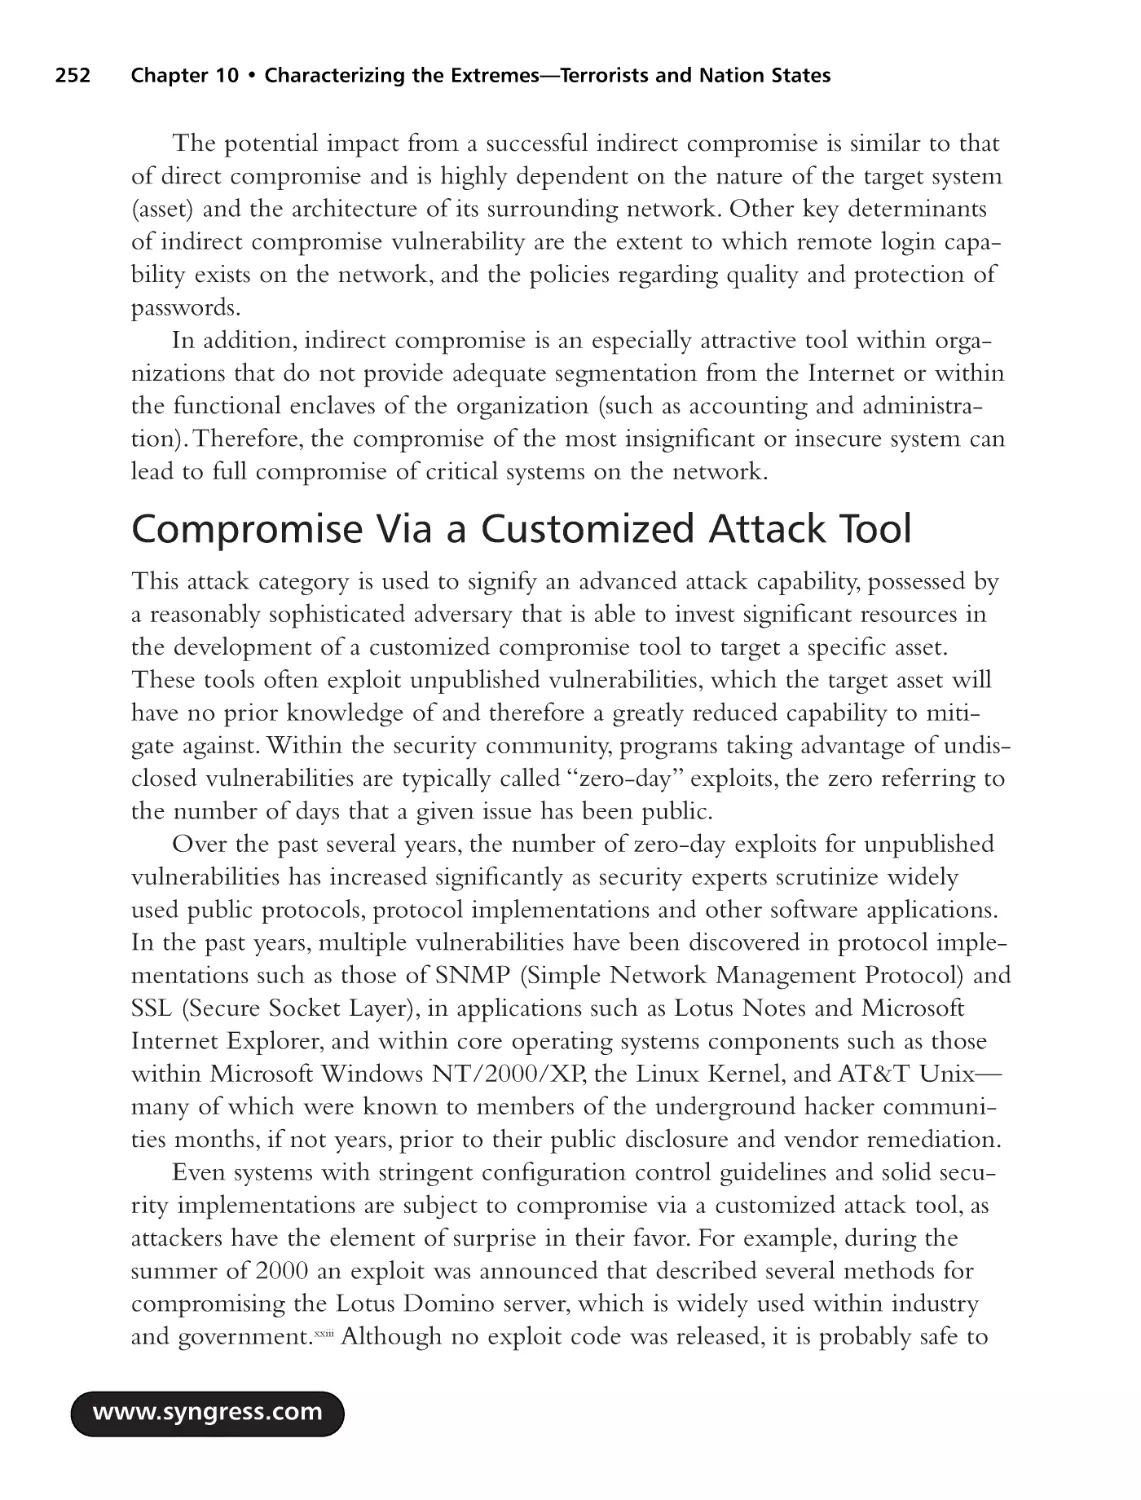 Compromise Via a Customized Attack Tool